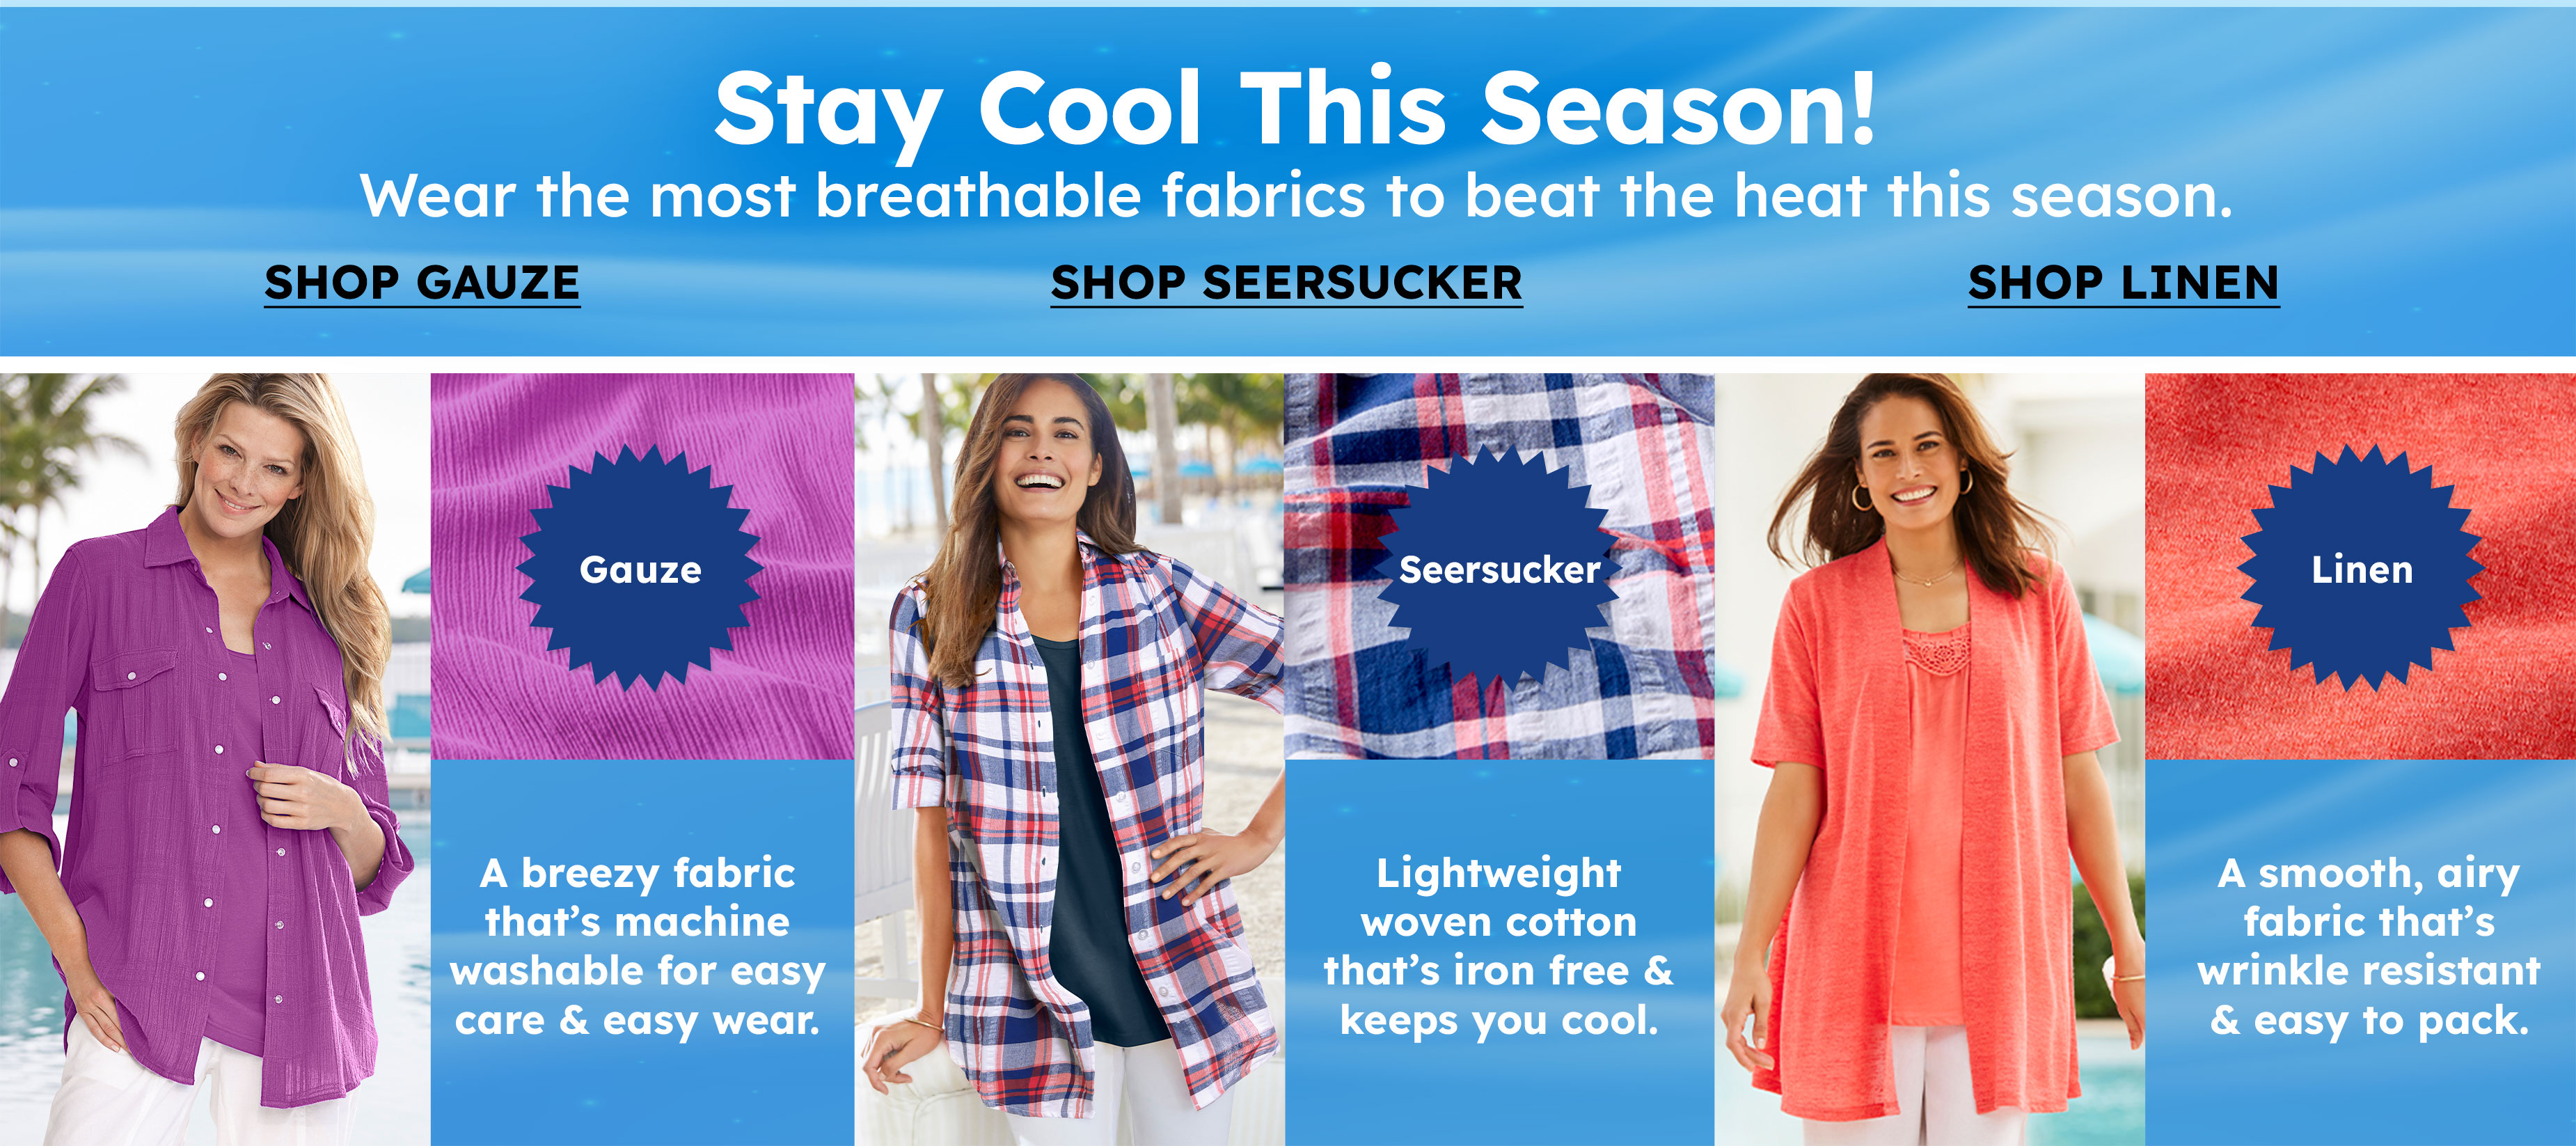 Stay Cool This Season! Wear the most breathable fabrics to beat the heat this season. 